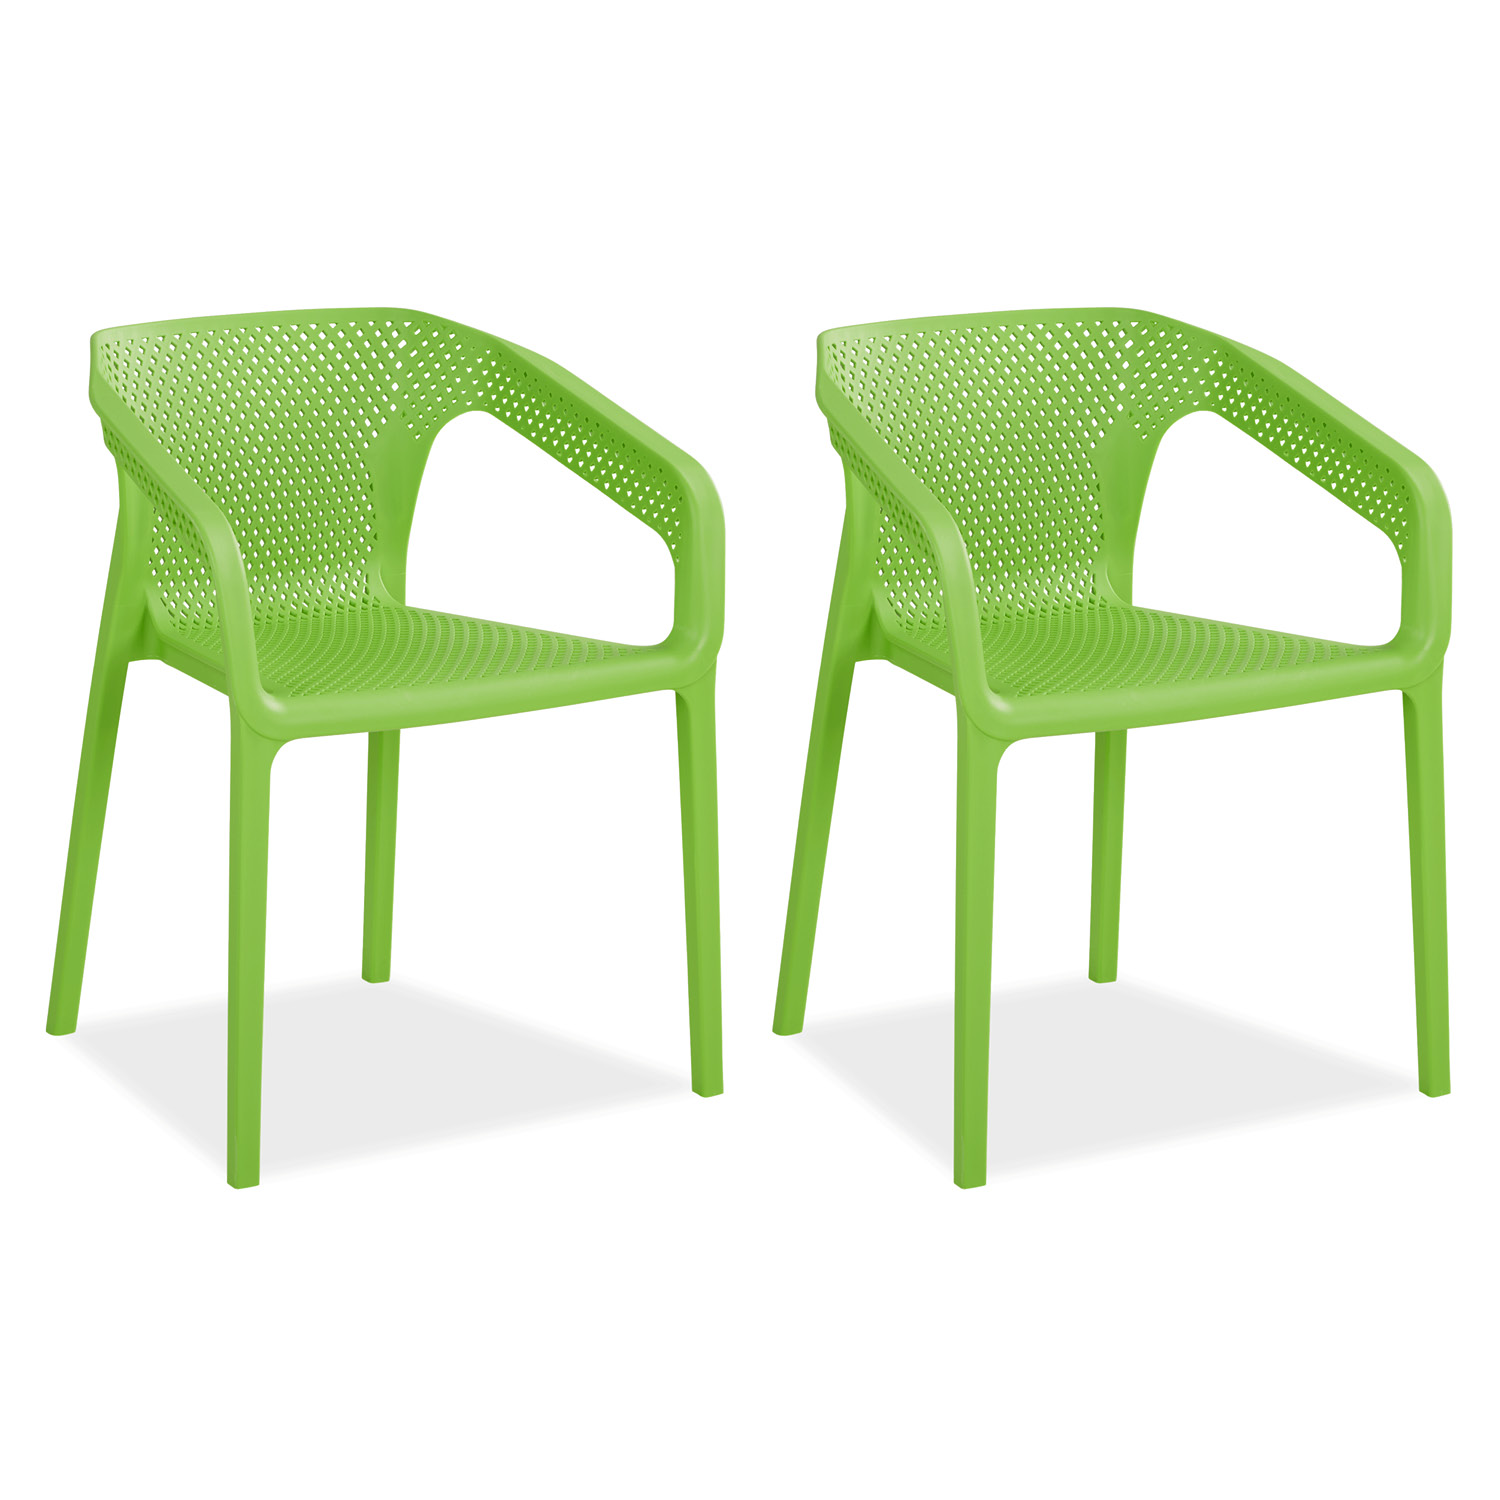 Set of 2 Garden chair with armrests Camping chairs Green Outdoor chairs Plastic Egg chair Lounger chairs Stacking chairs